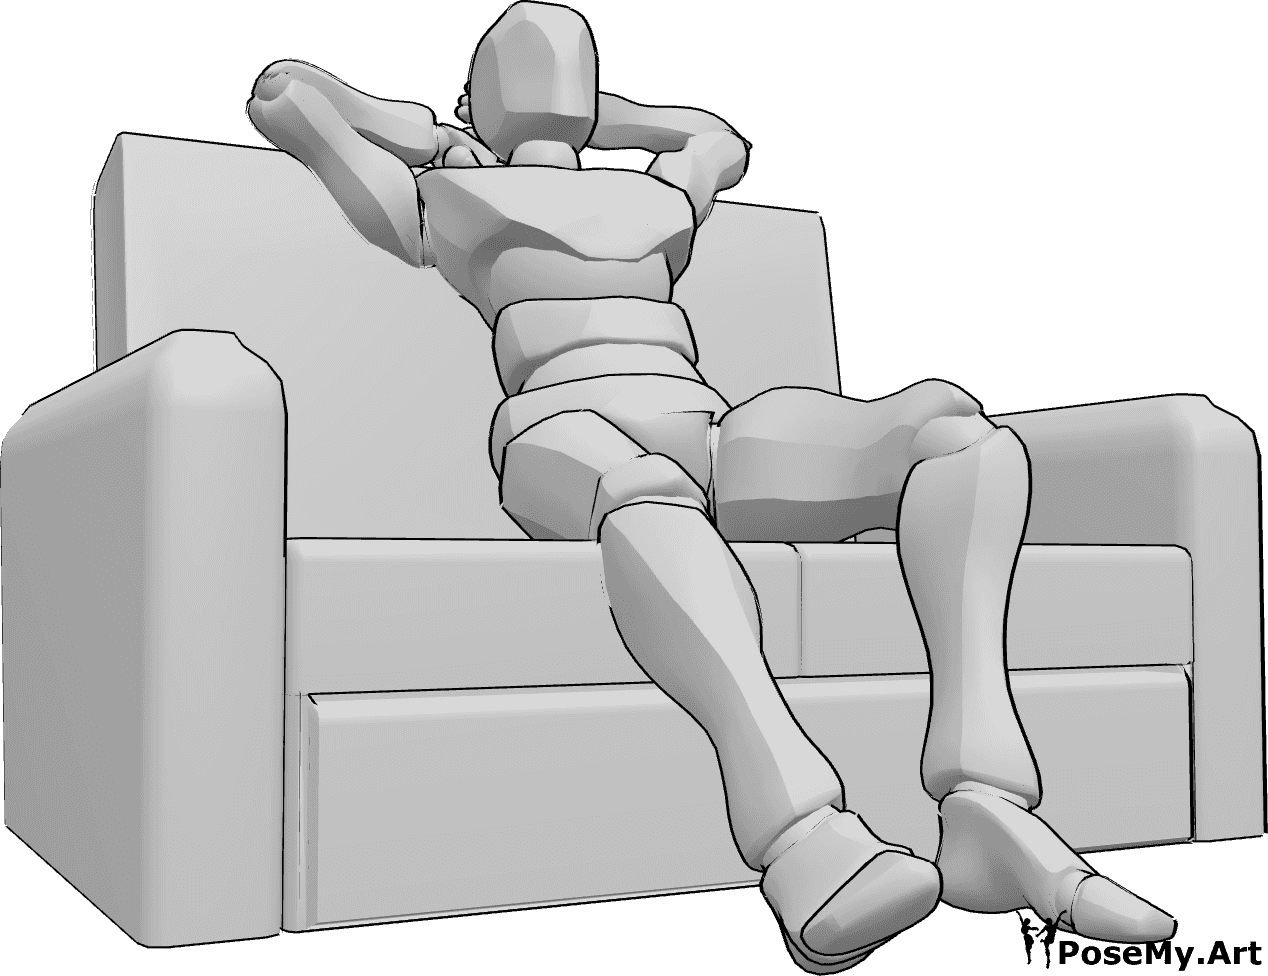 Pose Reference- Couch sitting pose - Male is sitting on the couch comfortably, stretching his legs and arms